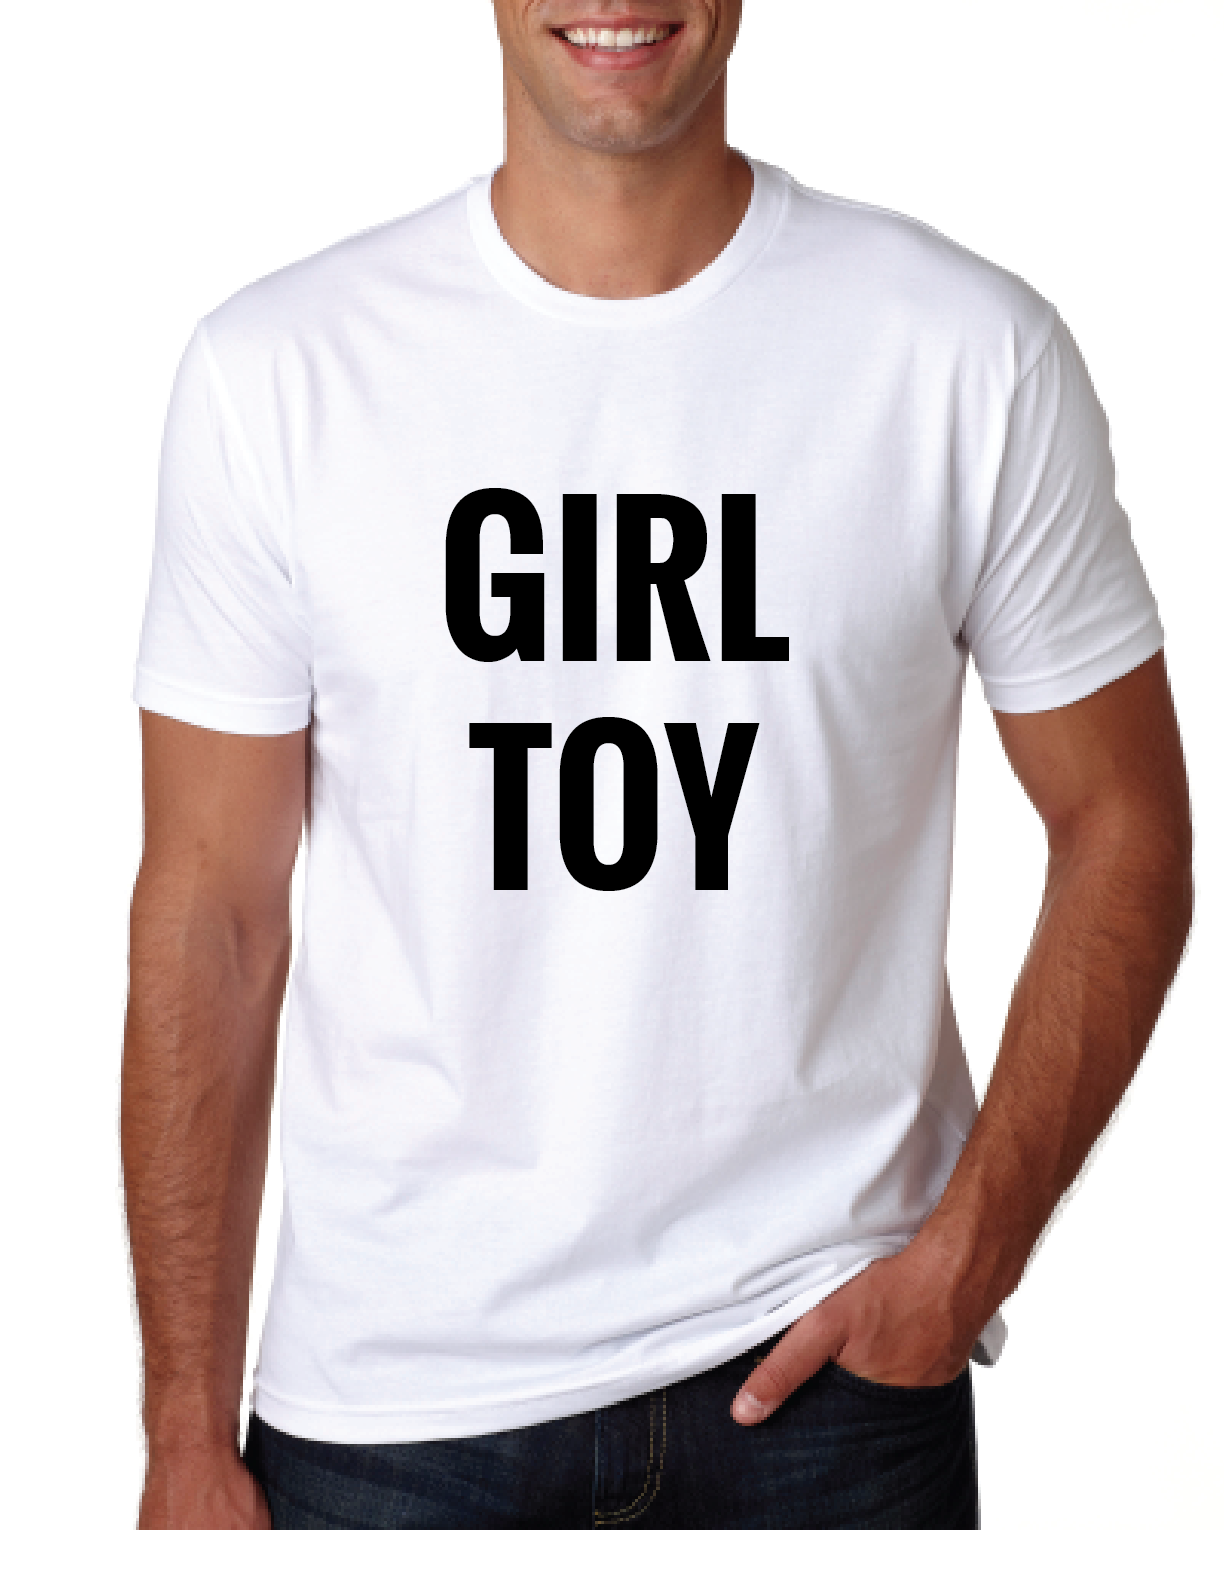 GIRL TOY